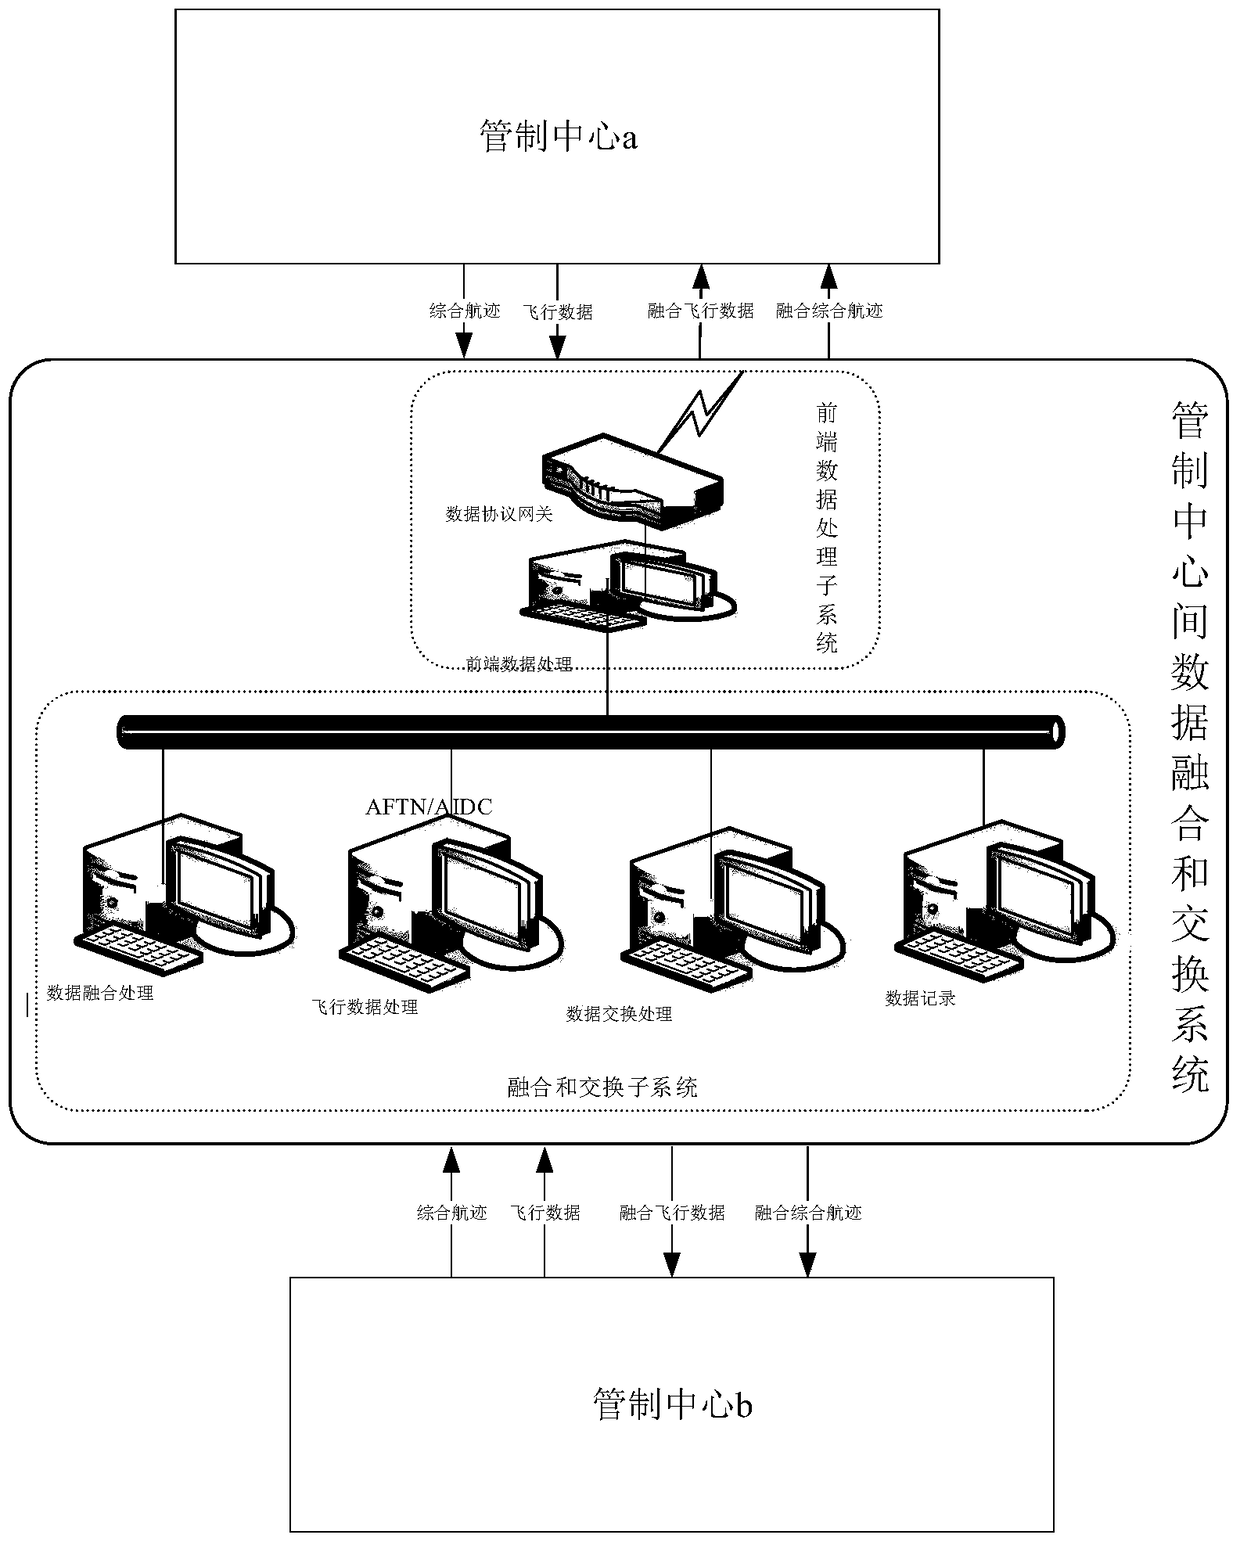 A system for data fusion and exchange between multiple control centers